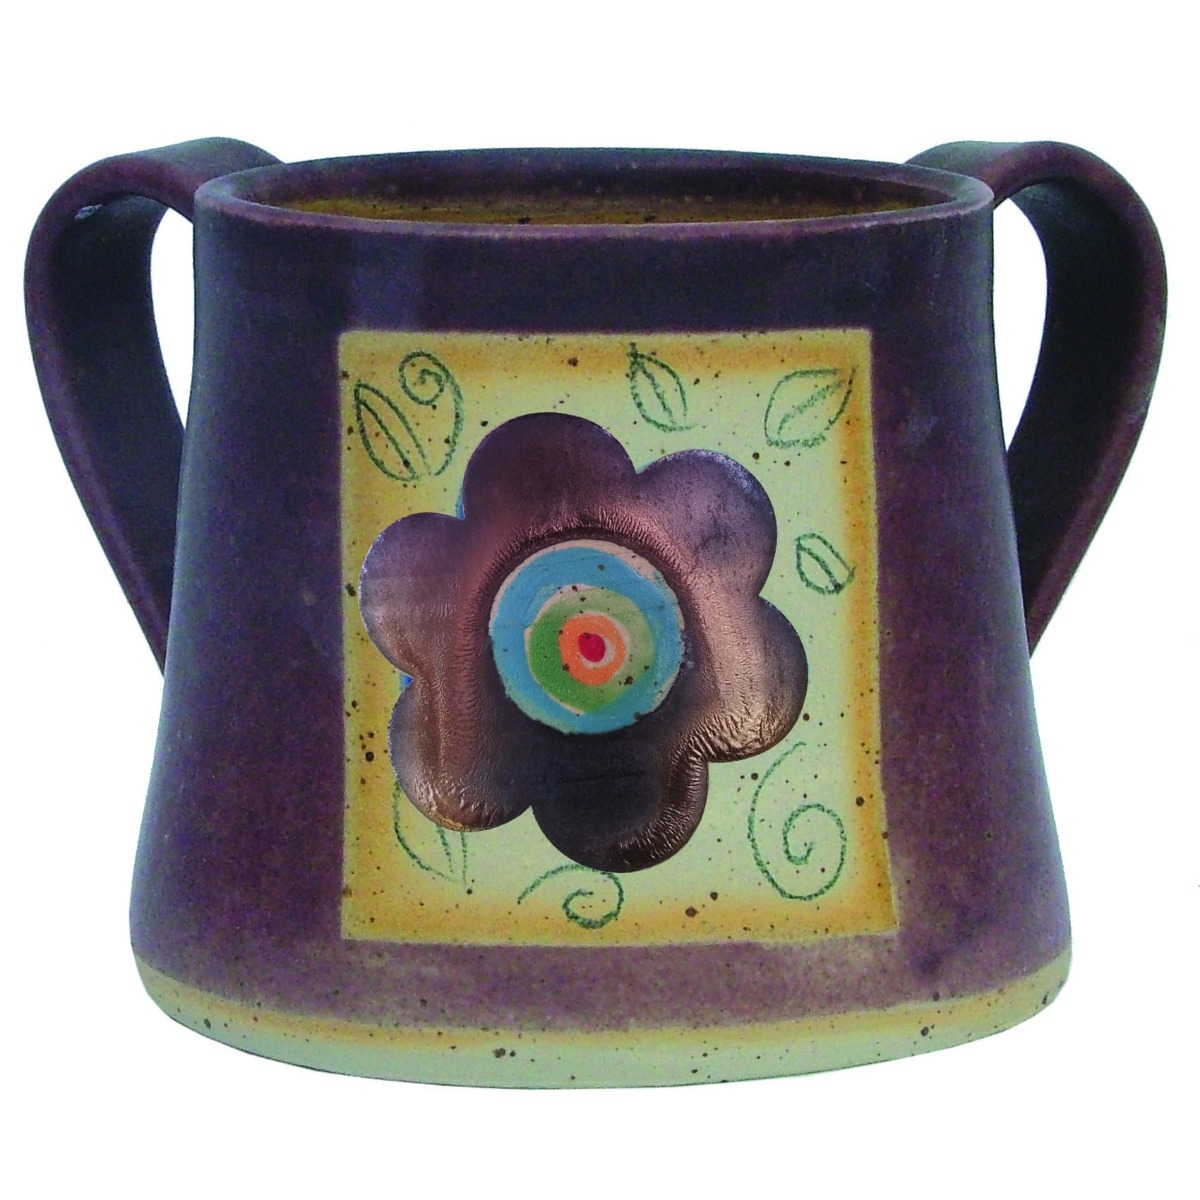 Handmade Ceramic Washing Cup - Flower. Available in Different Colors - 1